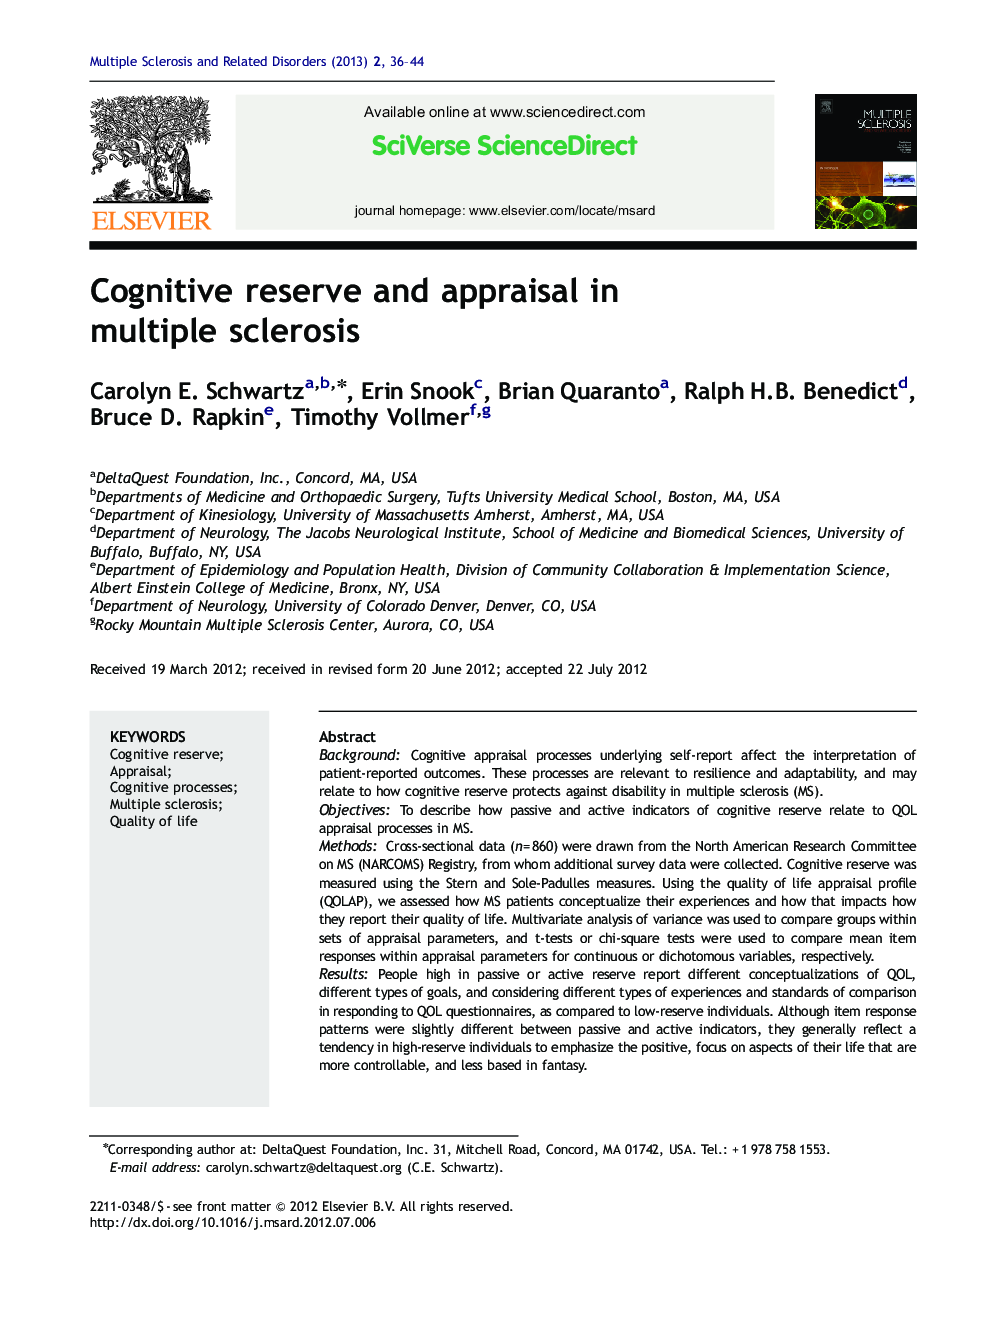 Cognitive reserve and appraisal in multiple sclerosis